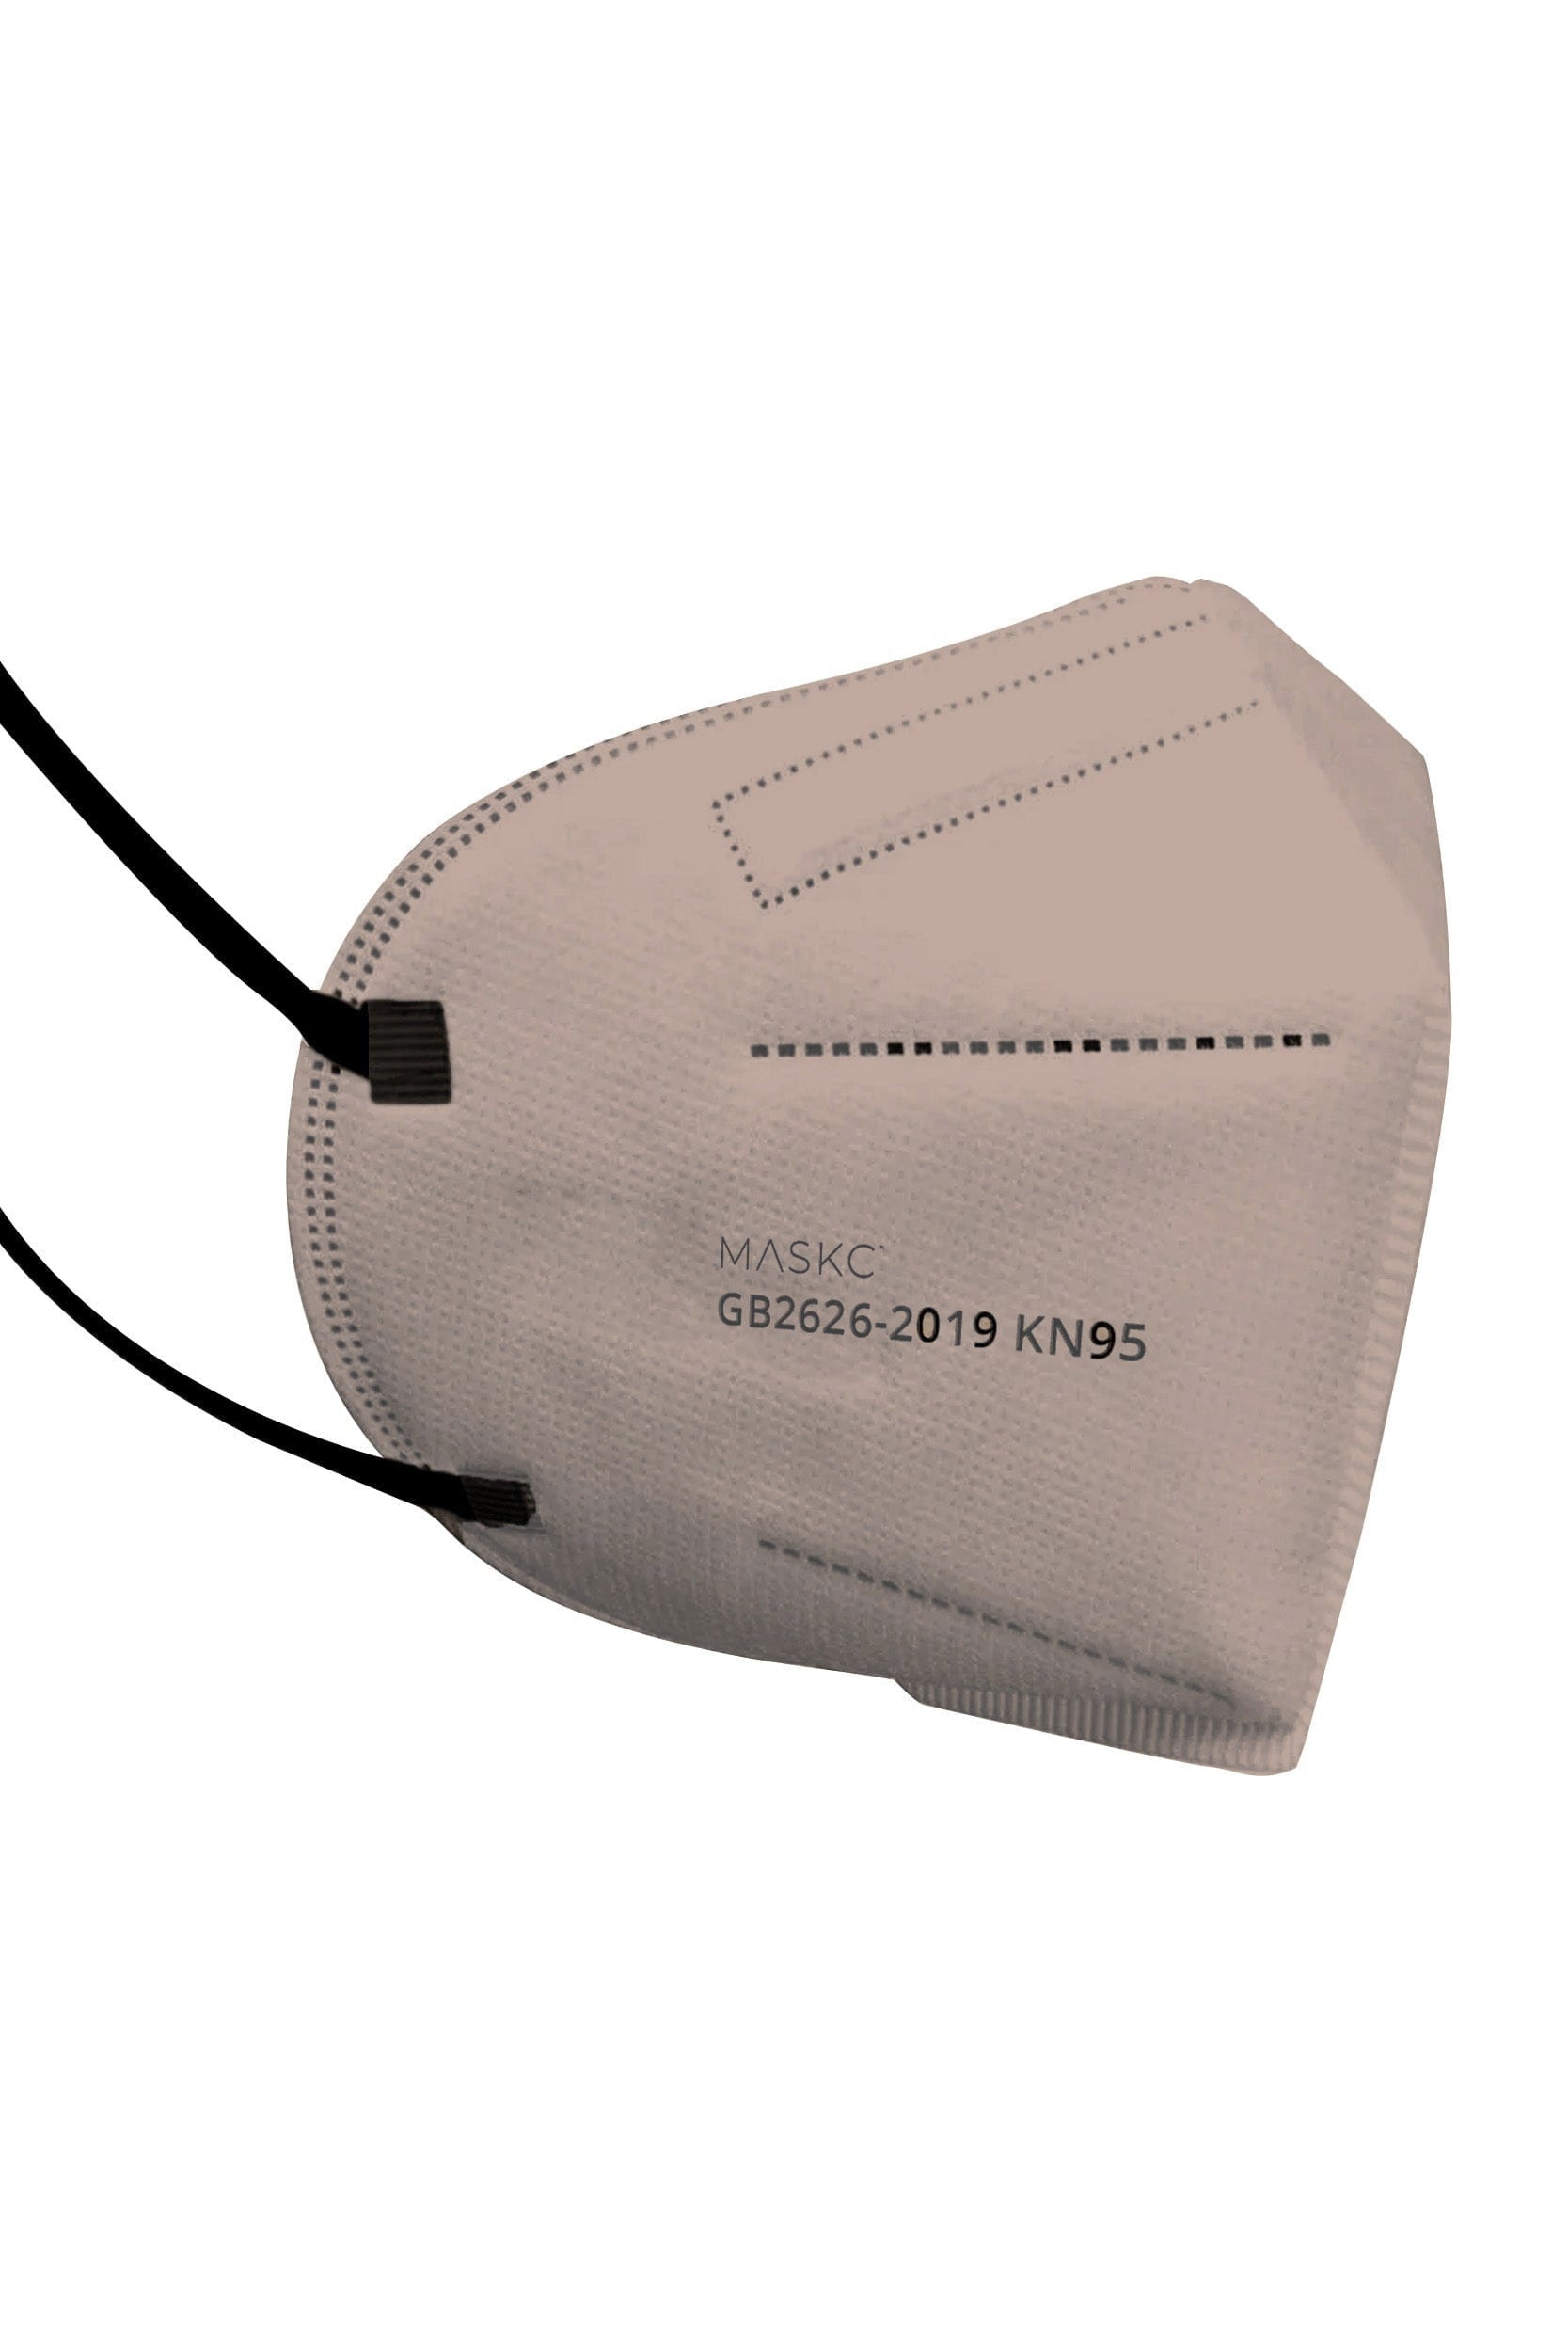 Stylish Light Brown KN95 face mask, with soft black ear loops and high quality fabric. 